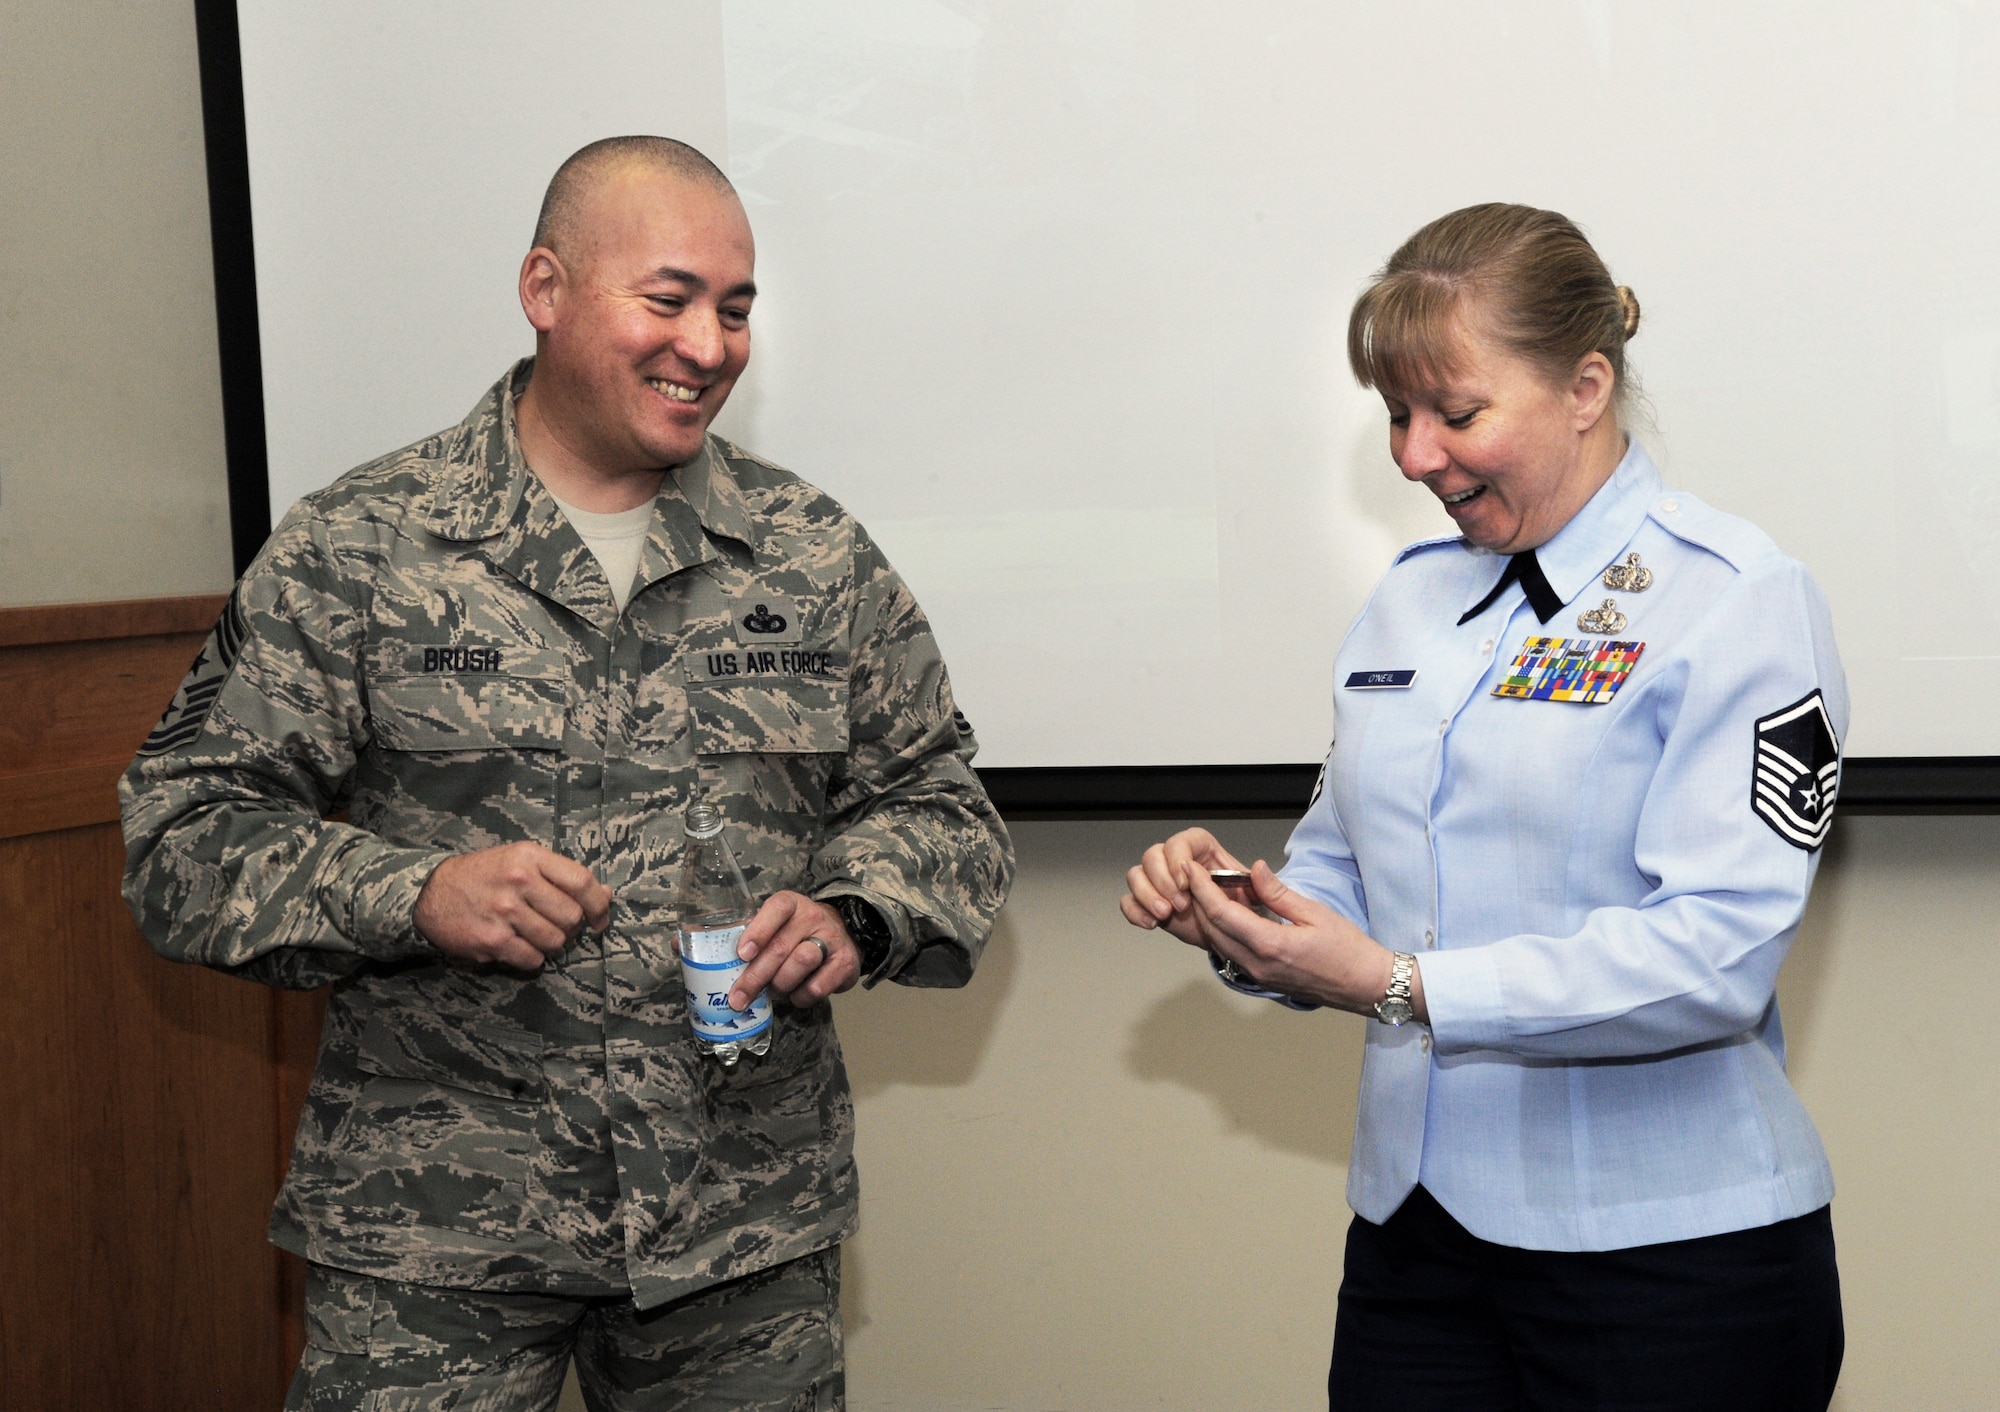 Chief Master Sgt. Mitchell O. Brush, Senior Enlisted Advisor for the National Guard Bureau, left, gives one of his coins to Master Sgt.  Anja O’Neil, assigned to the 123rd Fighter Squadron, right, during his visit to the Portland Air National Guard Base, Ore., Jan. 5, 2015. Chief Brush toured the air base and led a town hall event to highlight the changes and challenges that Soldiers and Airmen of the National Guard face going into the New Year. (U.S. Air National Guard photo by Tech. Sgt. John Hughel, 142nd Fighter Wing Public Affairs/Released)